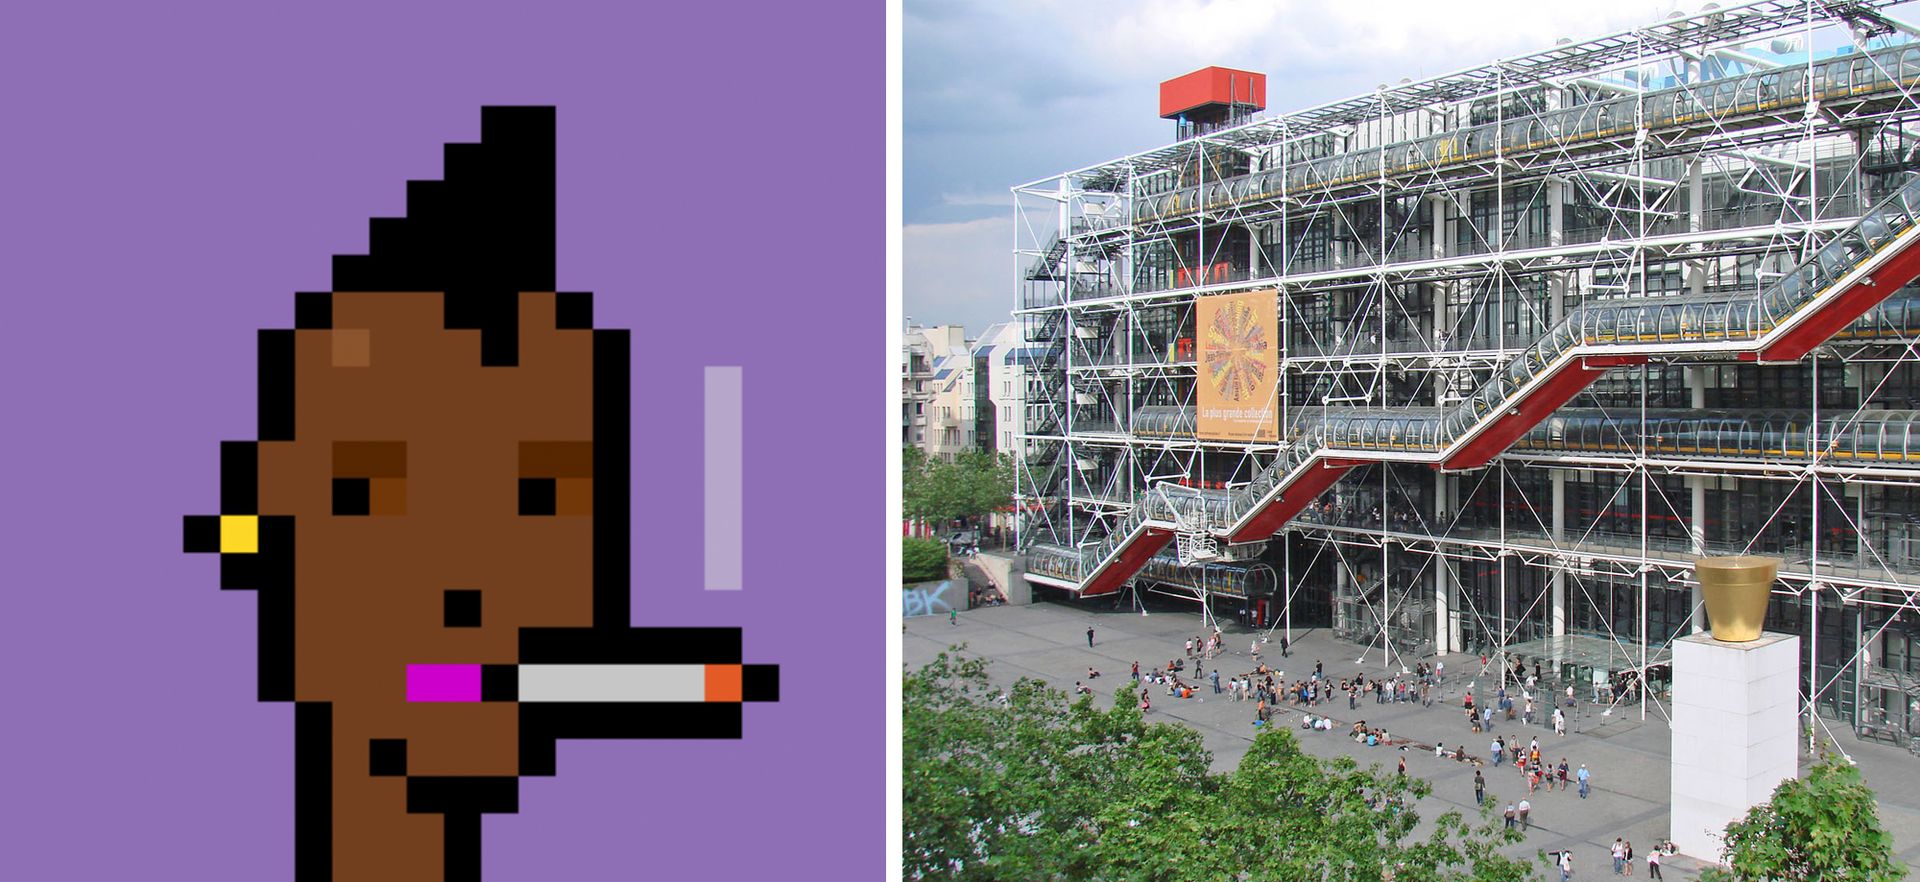 Eighteen NFTs, including Larva Labs's CryptoPunk #110 (left) have been acquired by the Centre Pompidou in Paris (right) CryptoPunk: courtesy of Centre Pompidou; Pompidou: Jean-Pierre Dalbéra